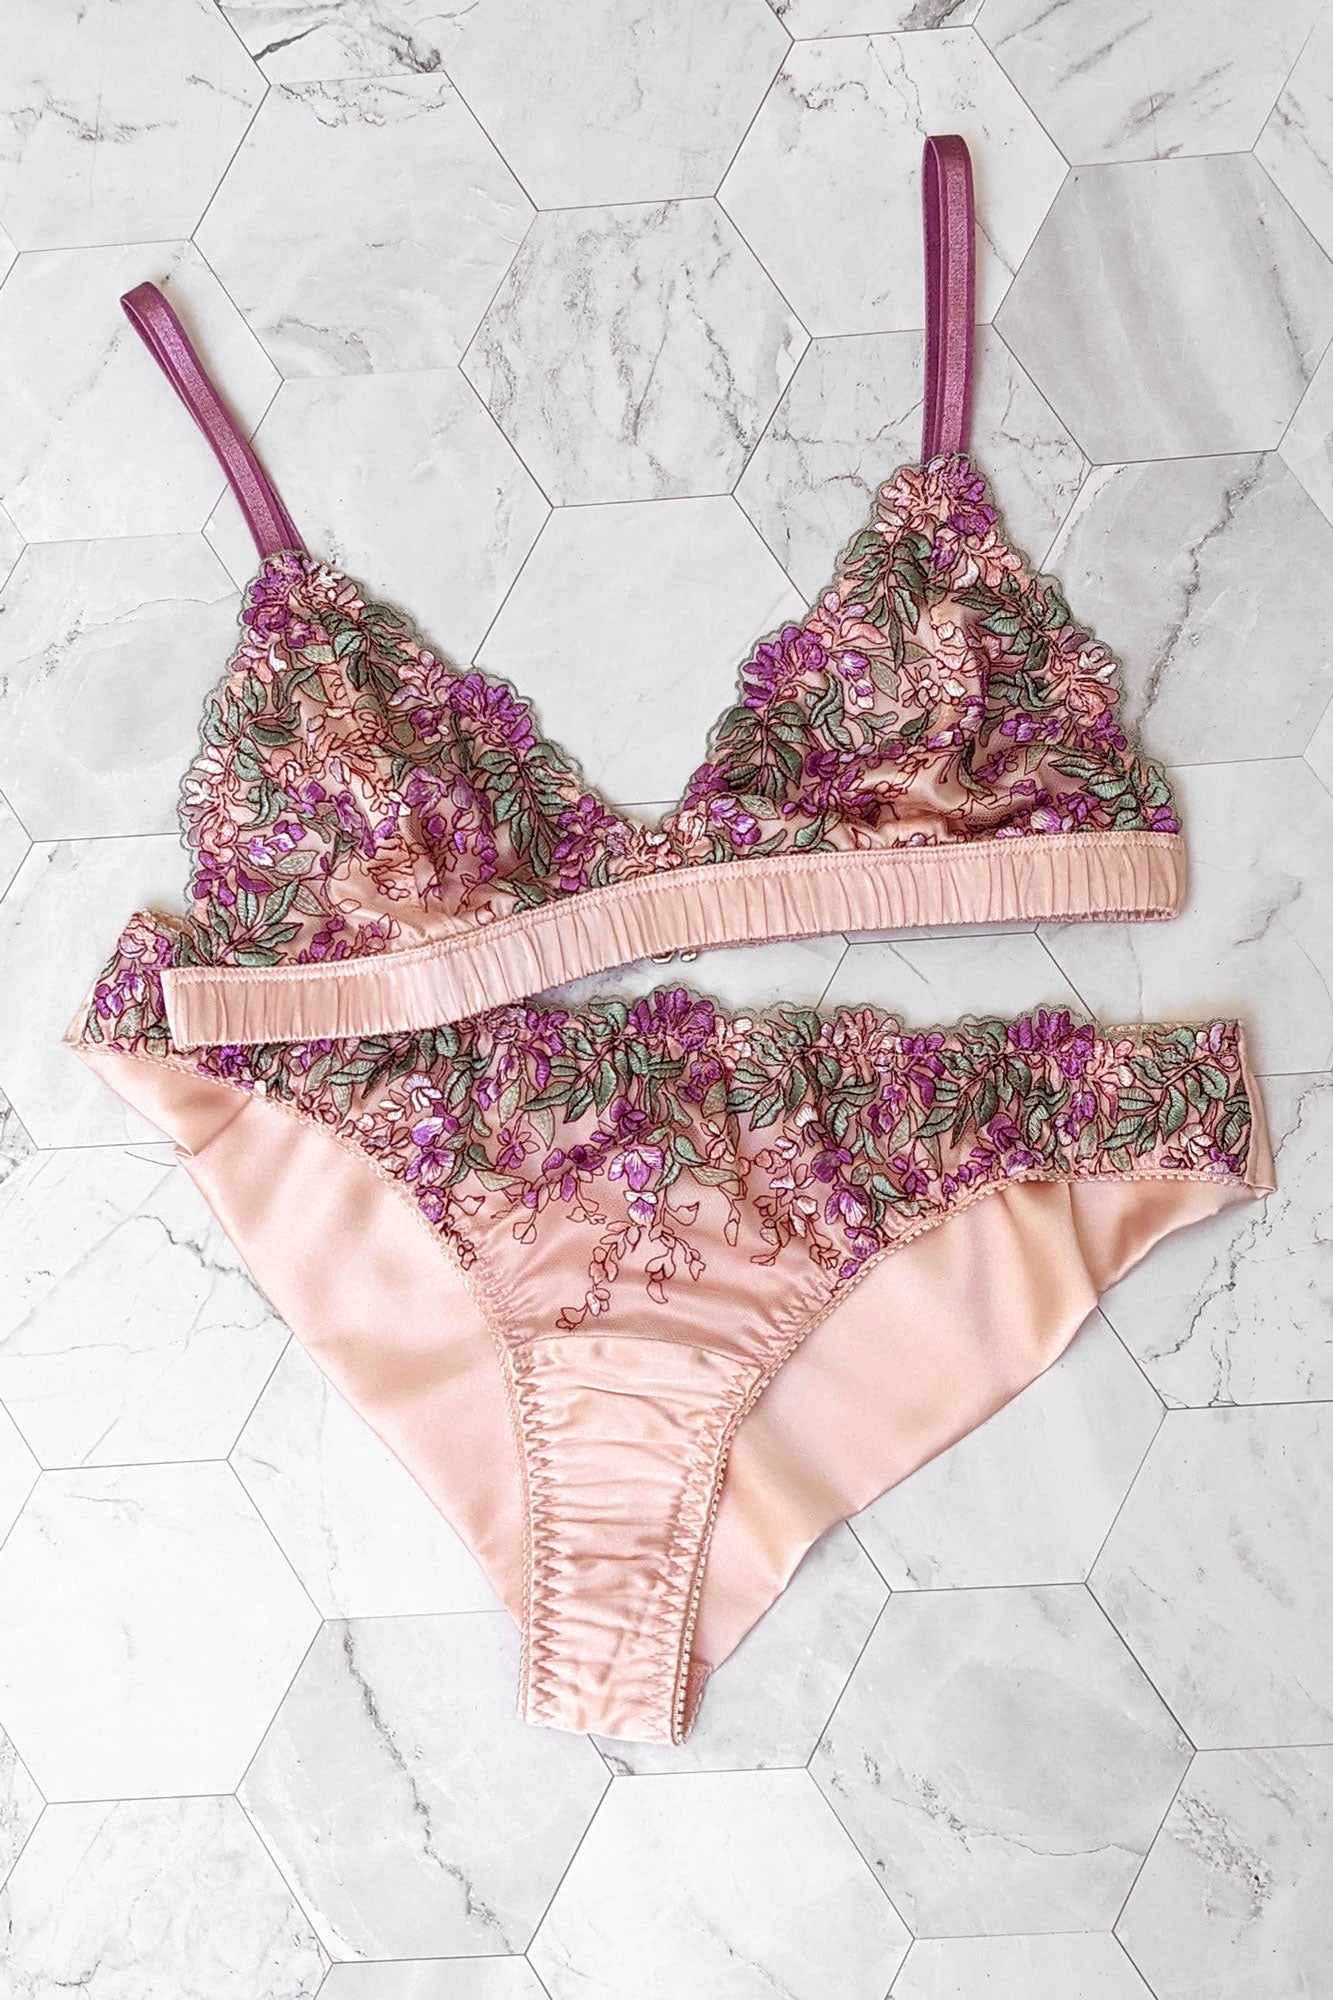 Luxury lingerie set in pink floral silk with ruched band and purple elastics